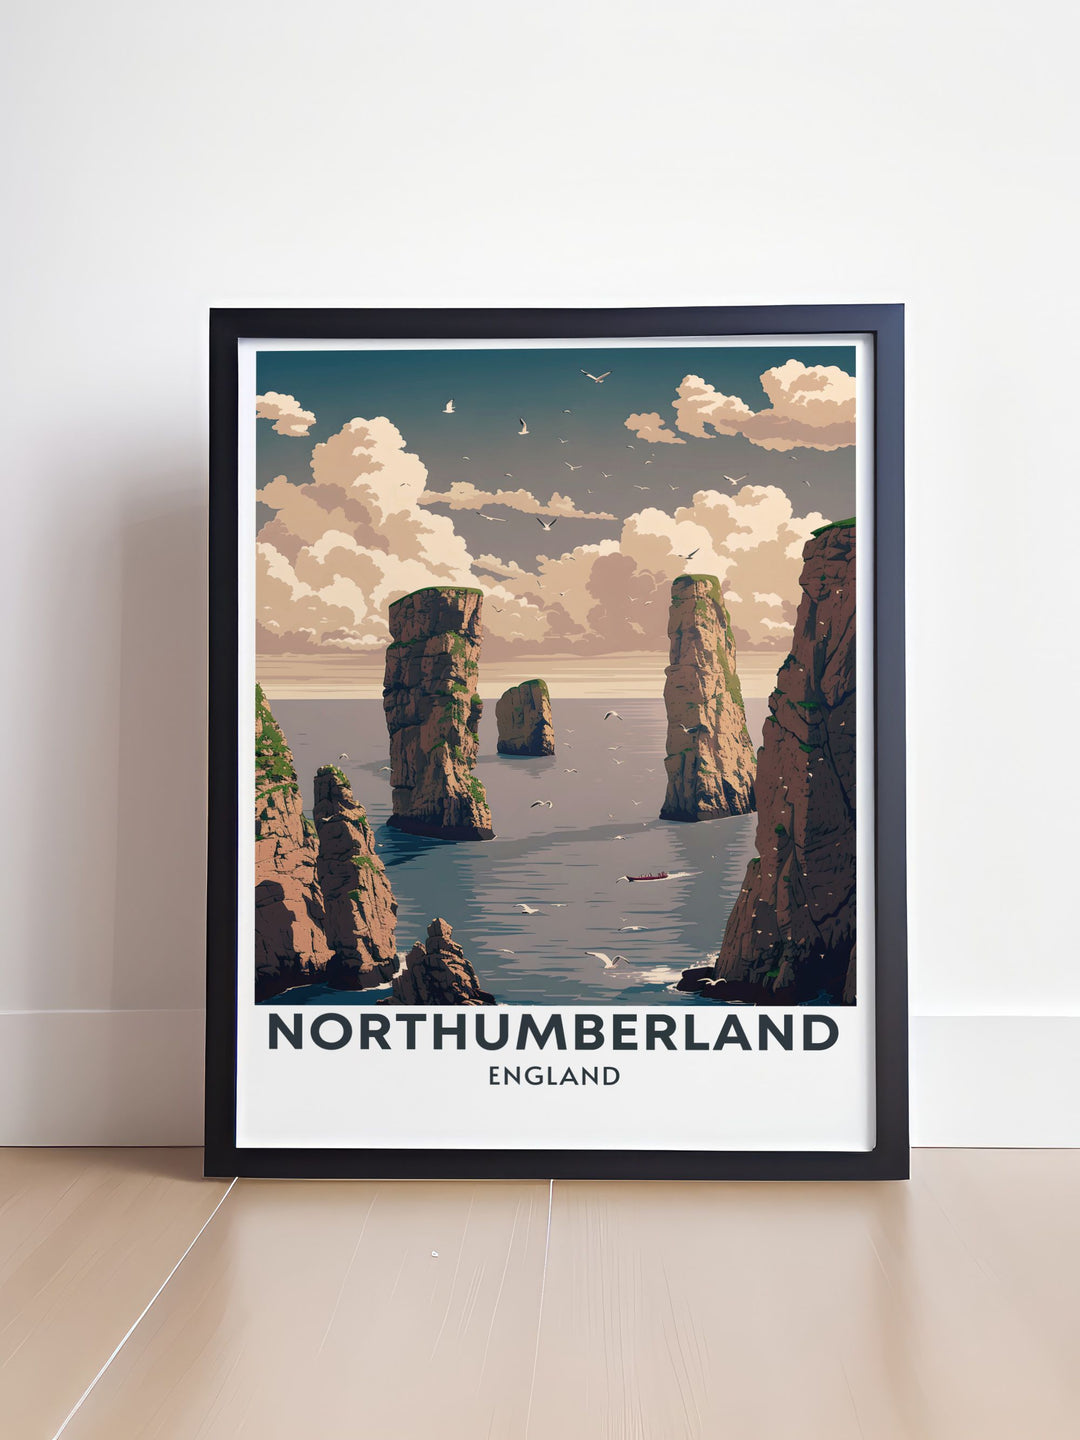 Stunning Farne Islands travel poster showcasing the islands' beauty on the Northumberland Coast. Ideal for home decor gifts and art collections this print adds a touch of natural elegance to any space.